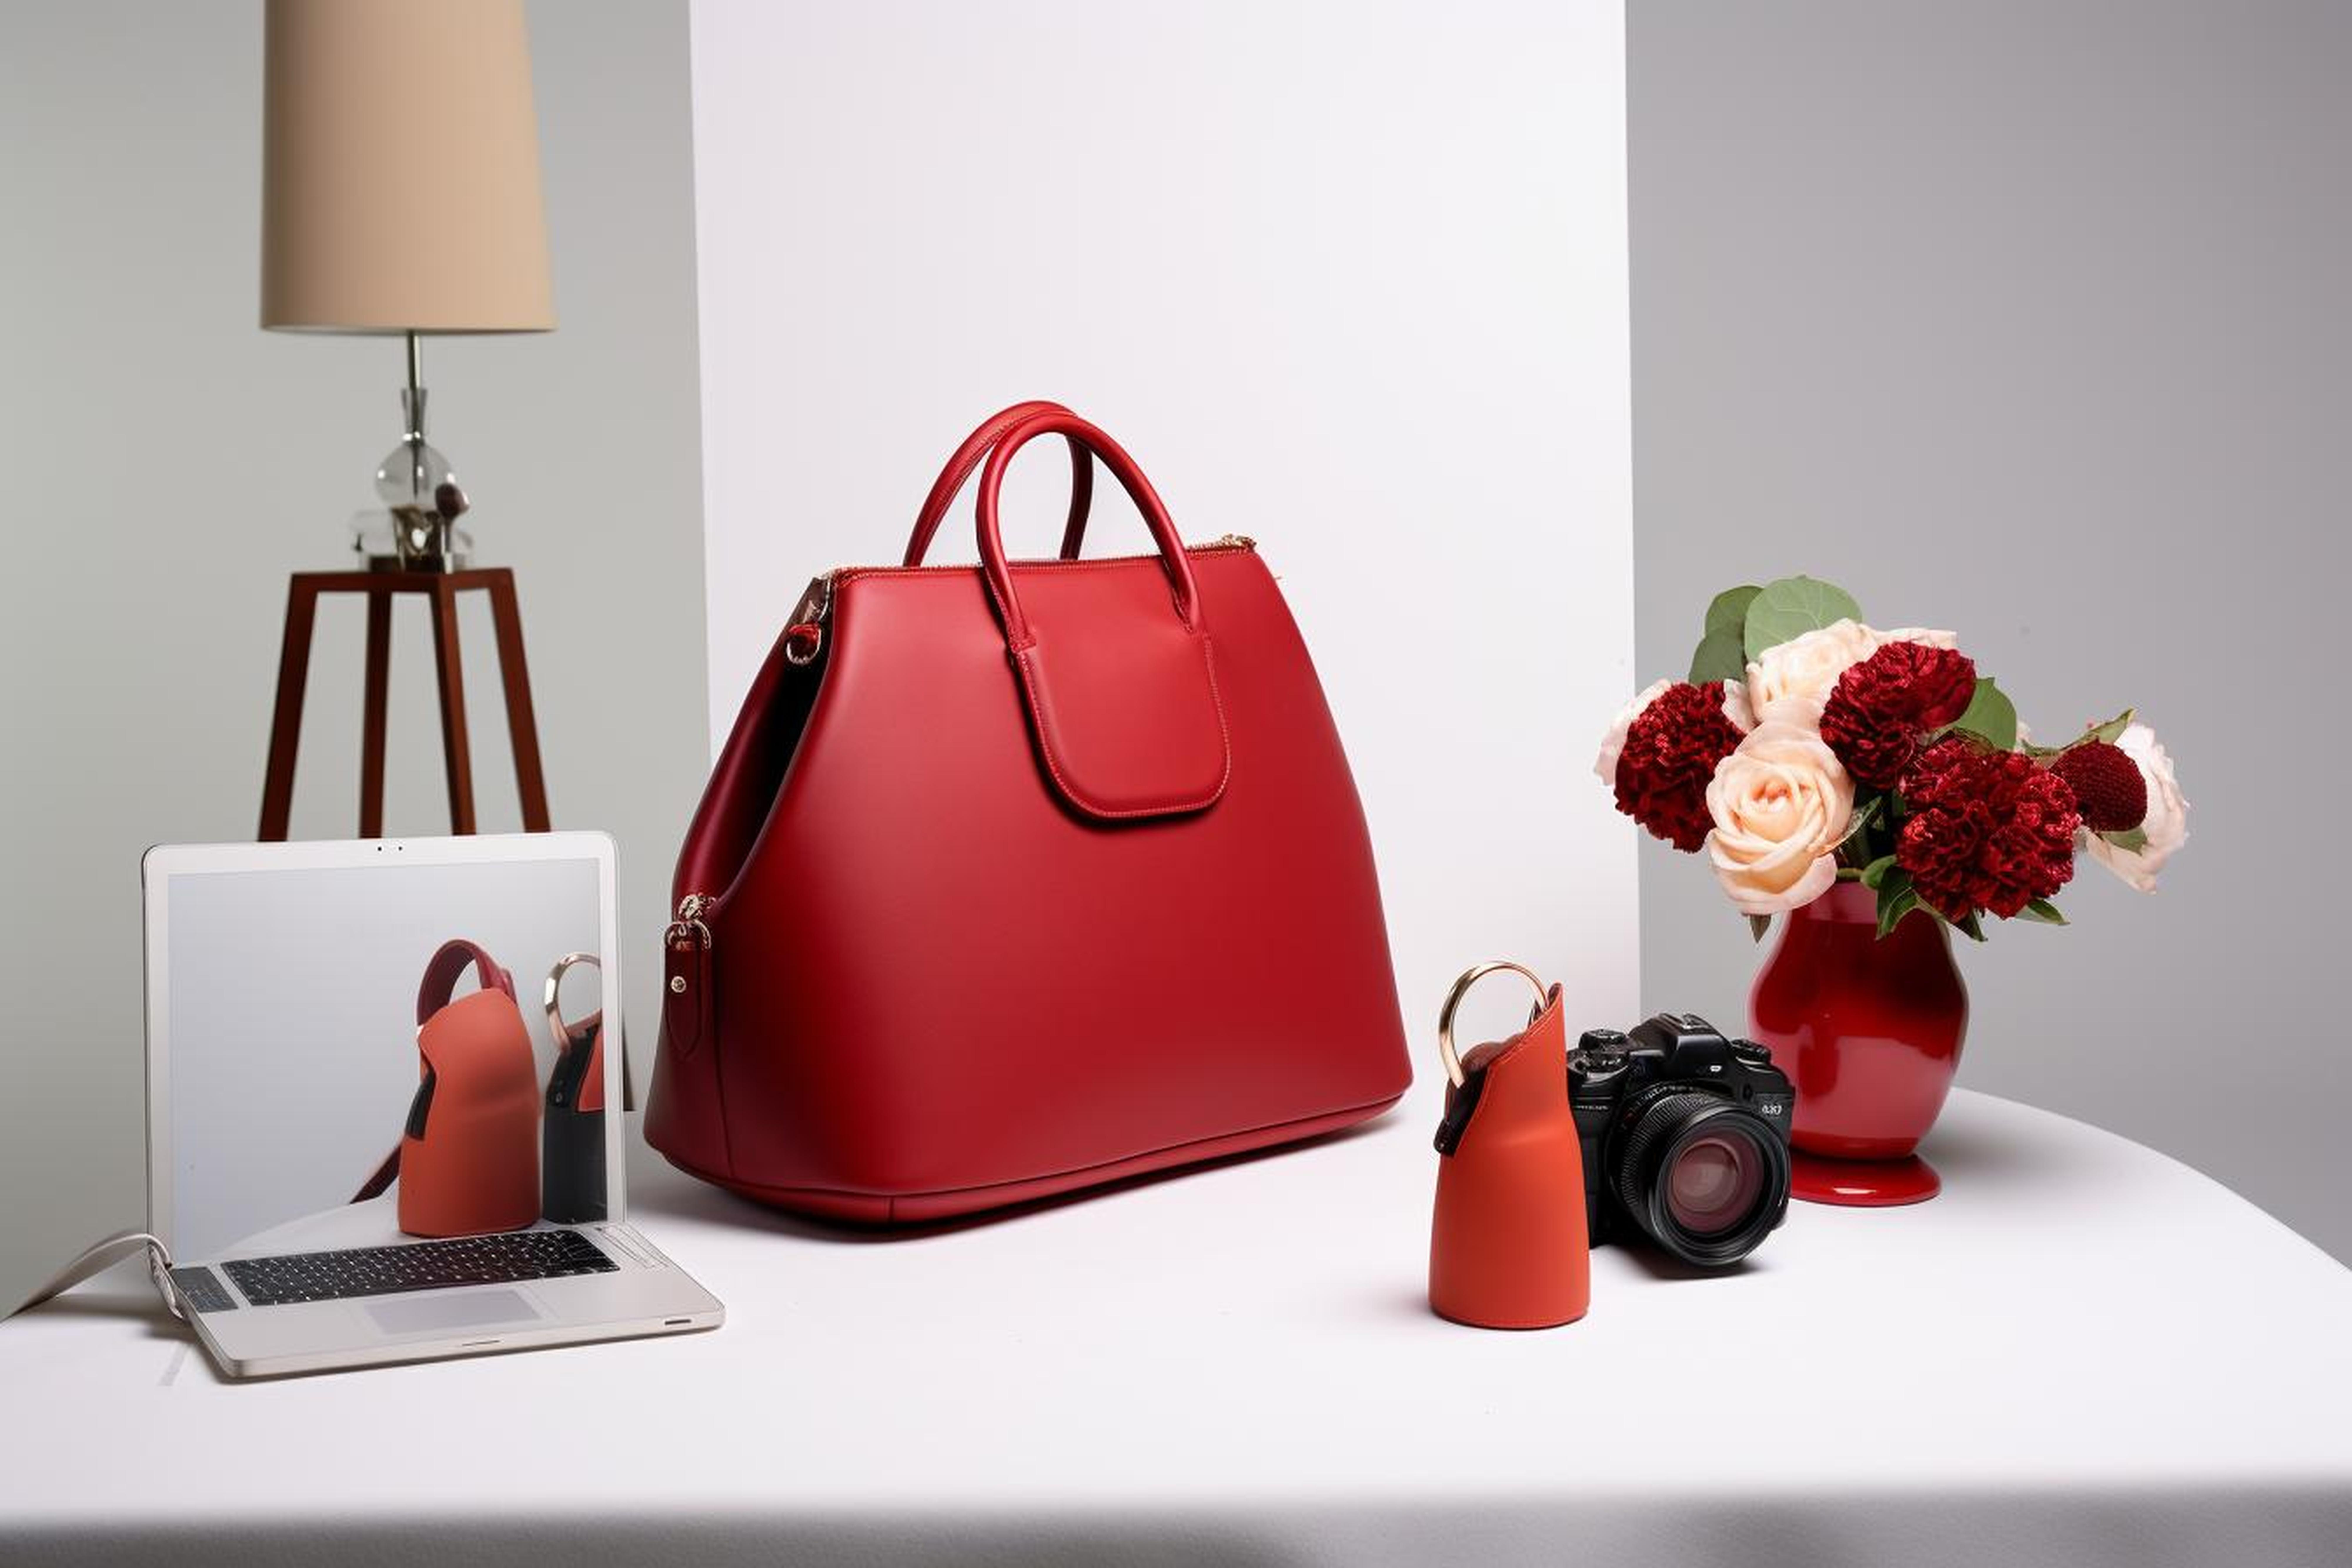 Red handbag displayed with a vase of flowers - Ecommerce product photo for bag company.